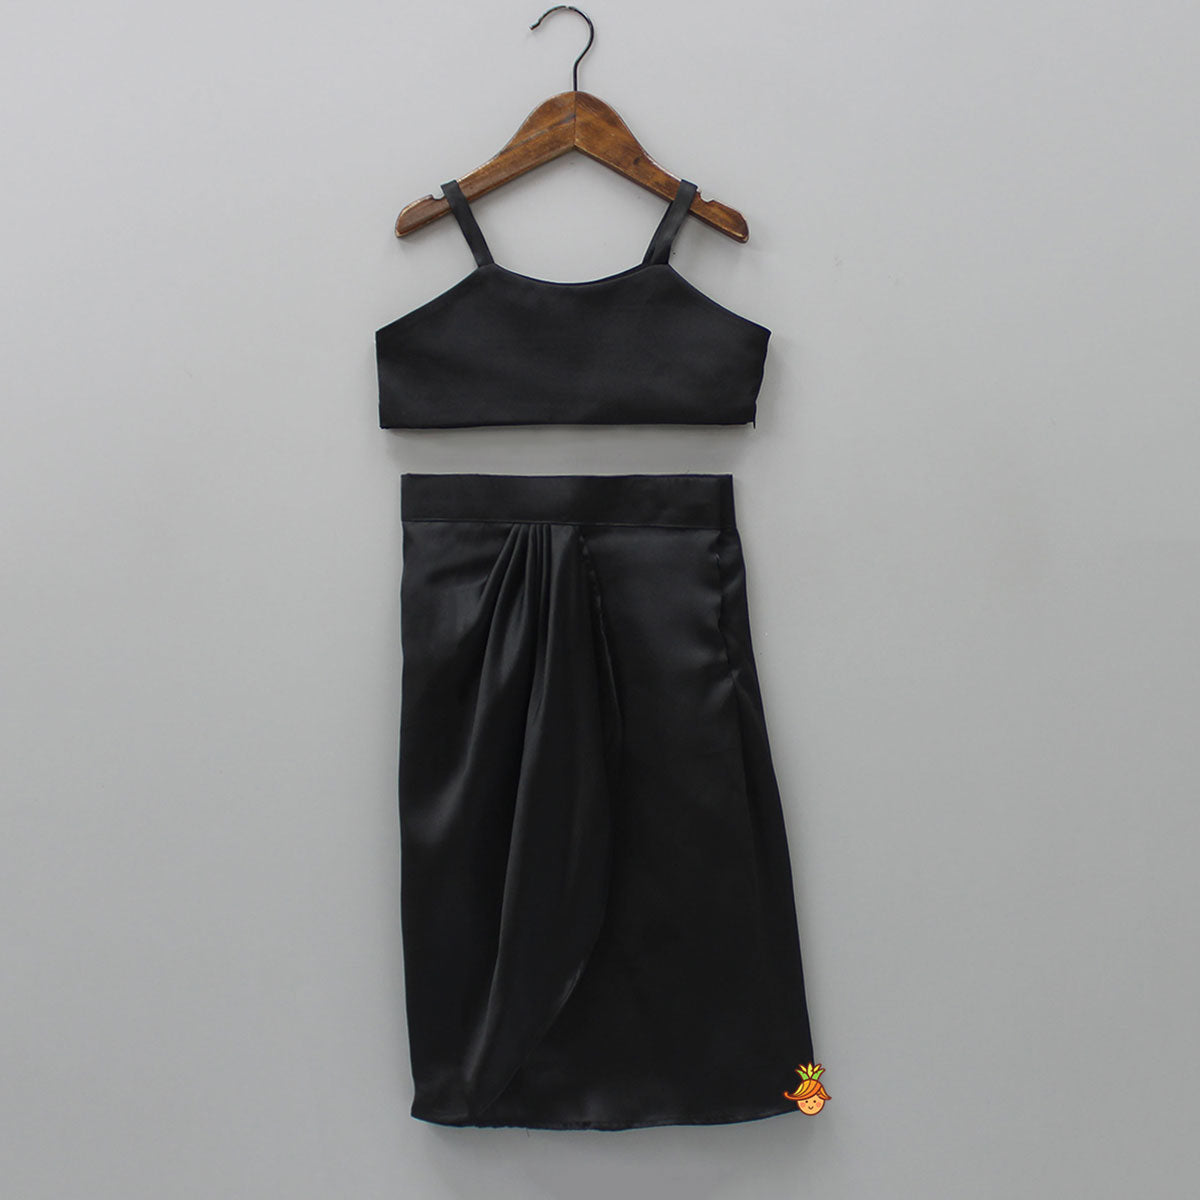 Black Crop Top With Sequined Scalloped Cape And Dhoti Style Skirt